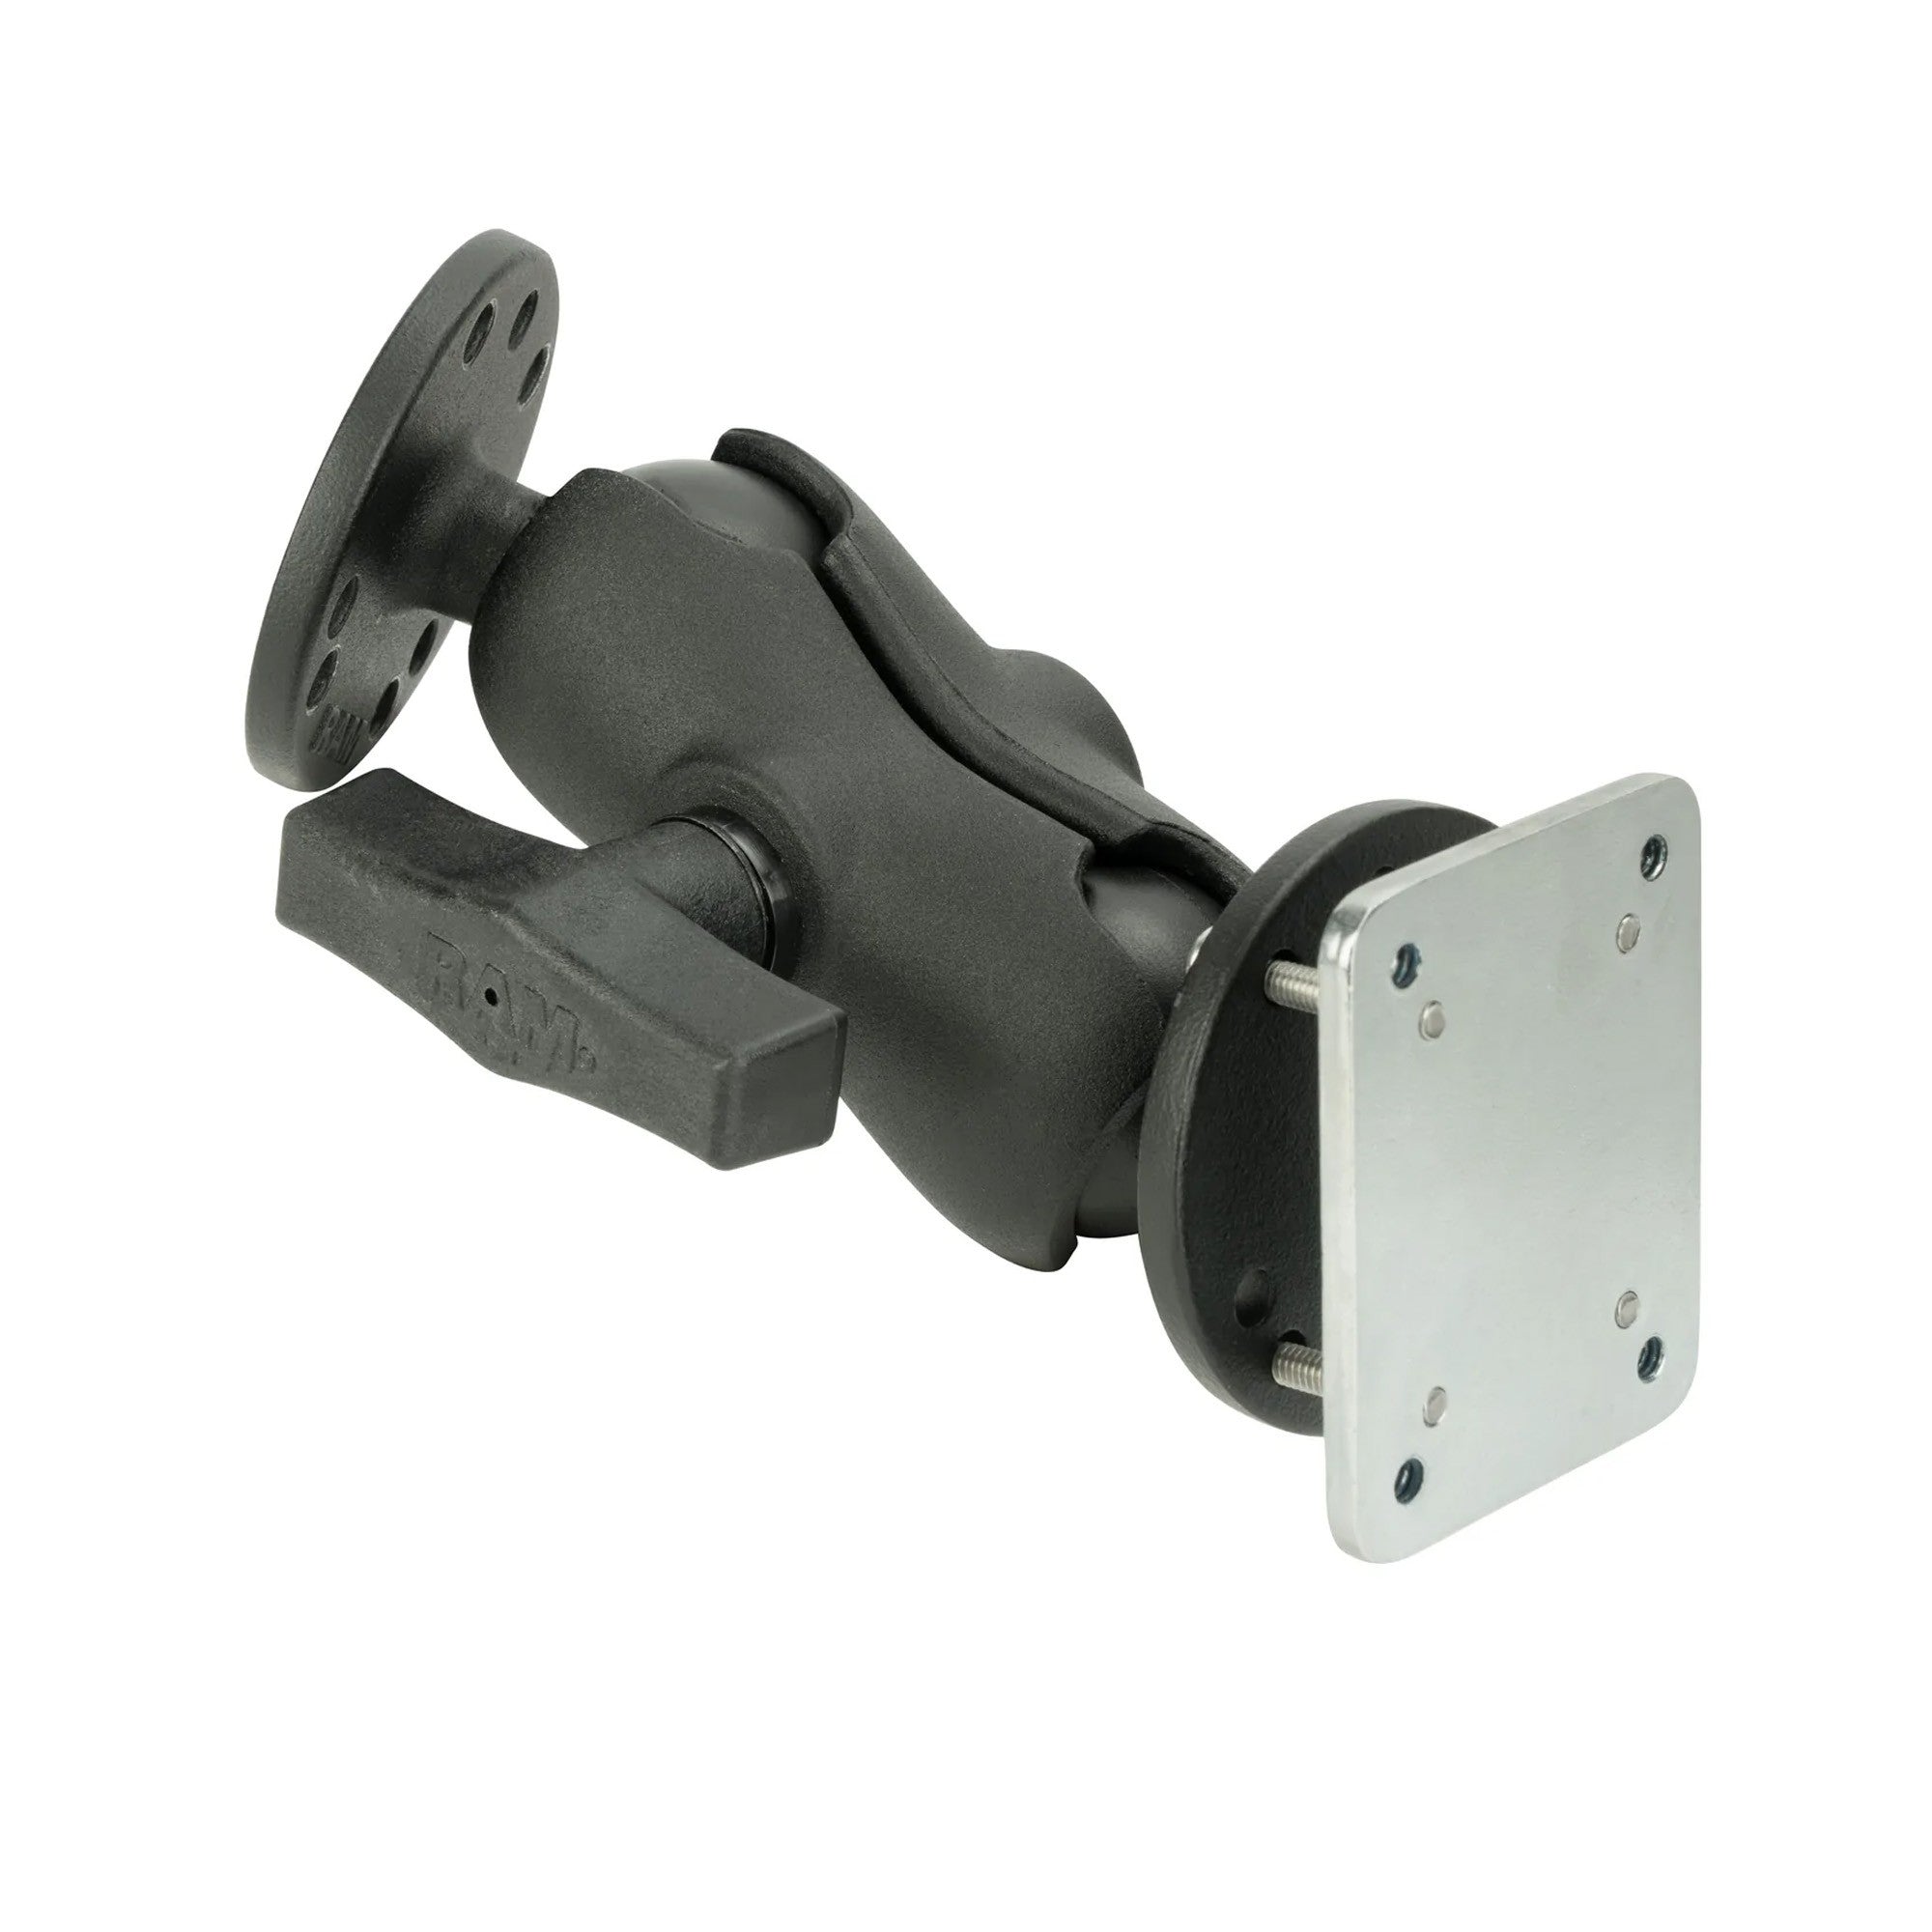 RAM Drill-Down Dashboard Mount with Backing Plate